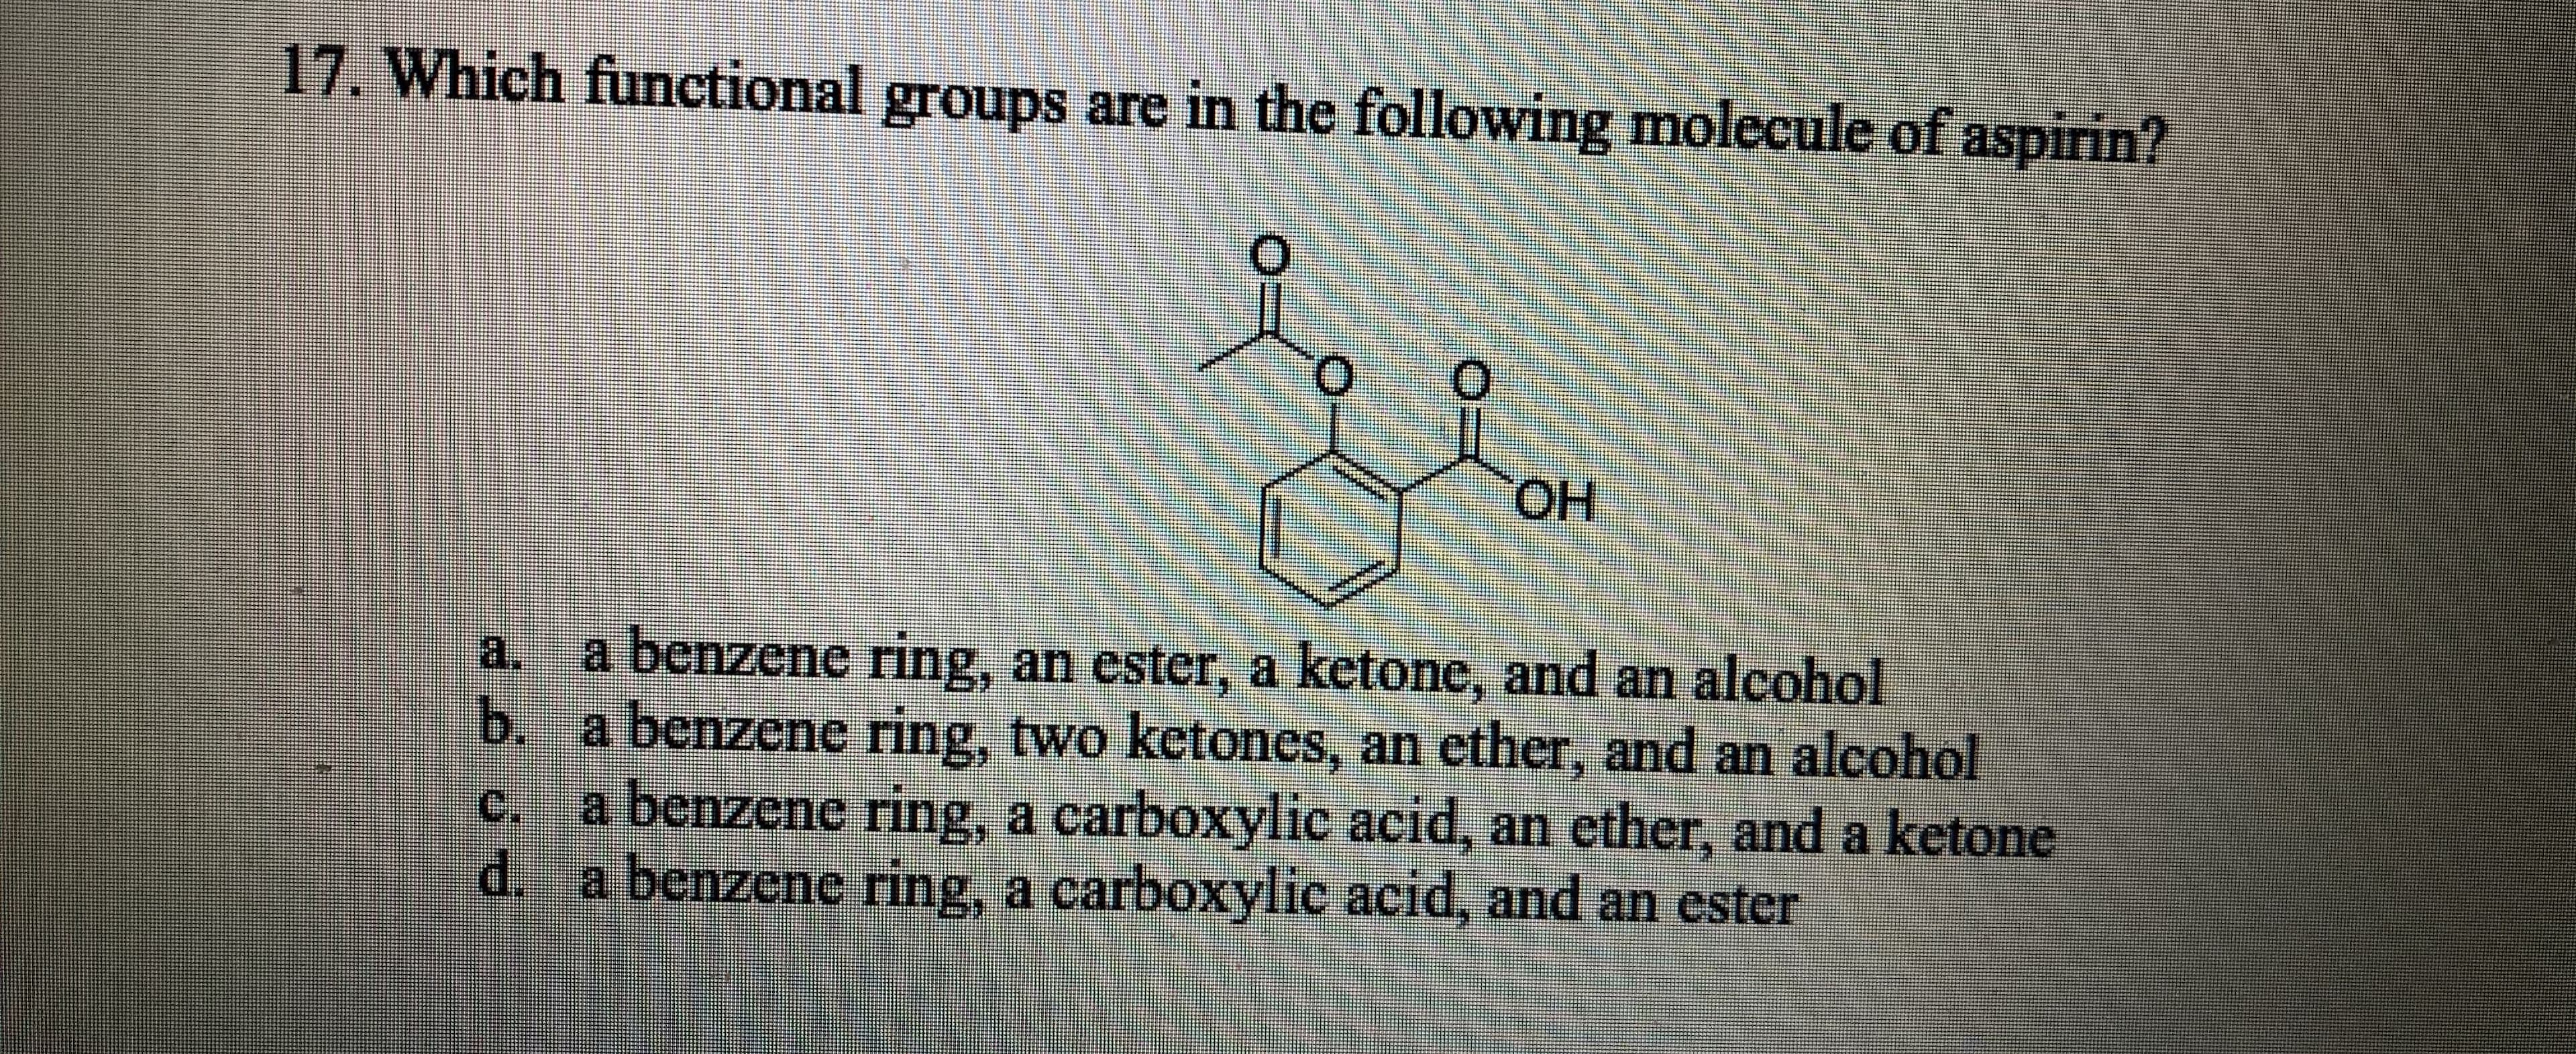 17. Which functional groups are in the following molecule of aspirin?
HOH
a. a benzene ring, an ester, a ketone, and an alcohol
b. a benzene ring, two ketones, an ether, and an alcohol
c.
a benzene ing, a carboxylic acid, an ether, and a ketone
d.
benzene ring, a carboxylic acid, and an ester
